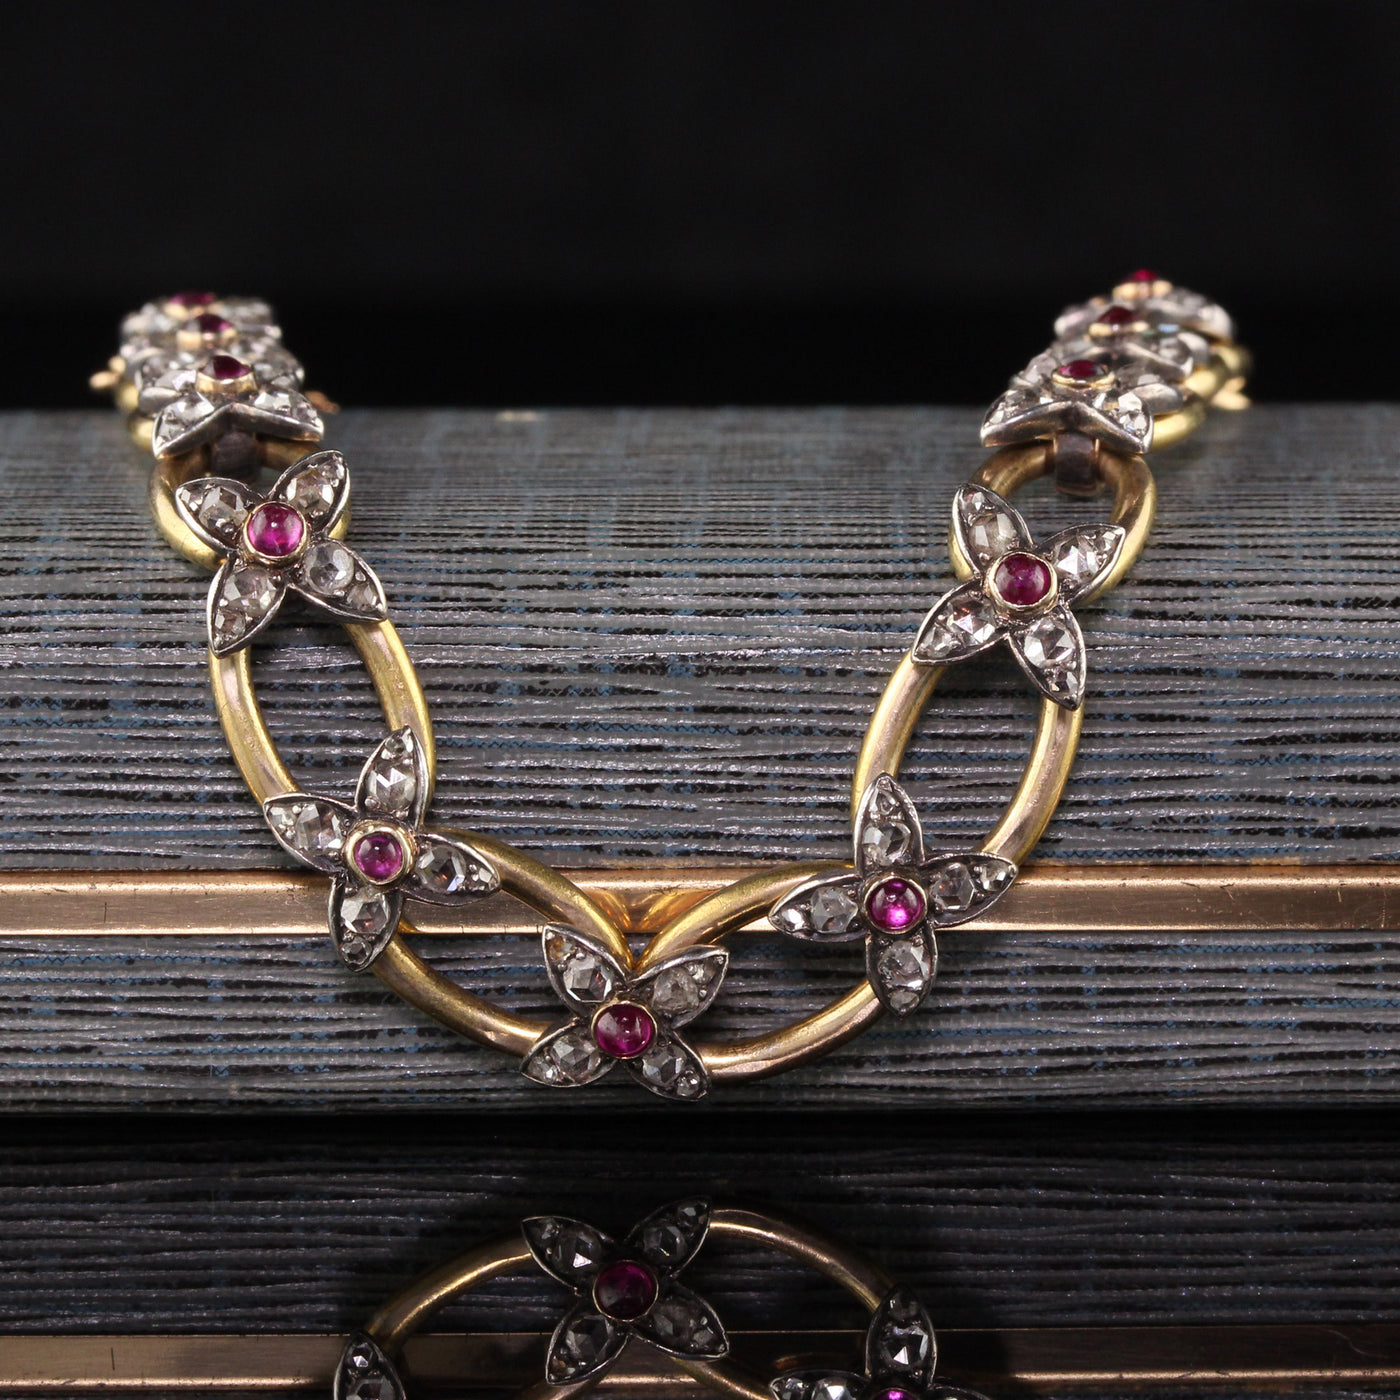 Antique Victorian 18K Yellow Gold and Silver Rose Cut Diamond and Ruby Bracelet